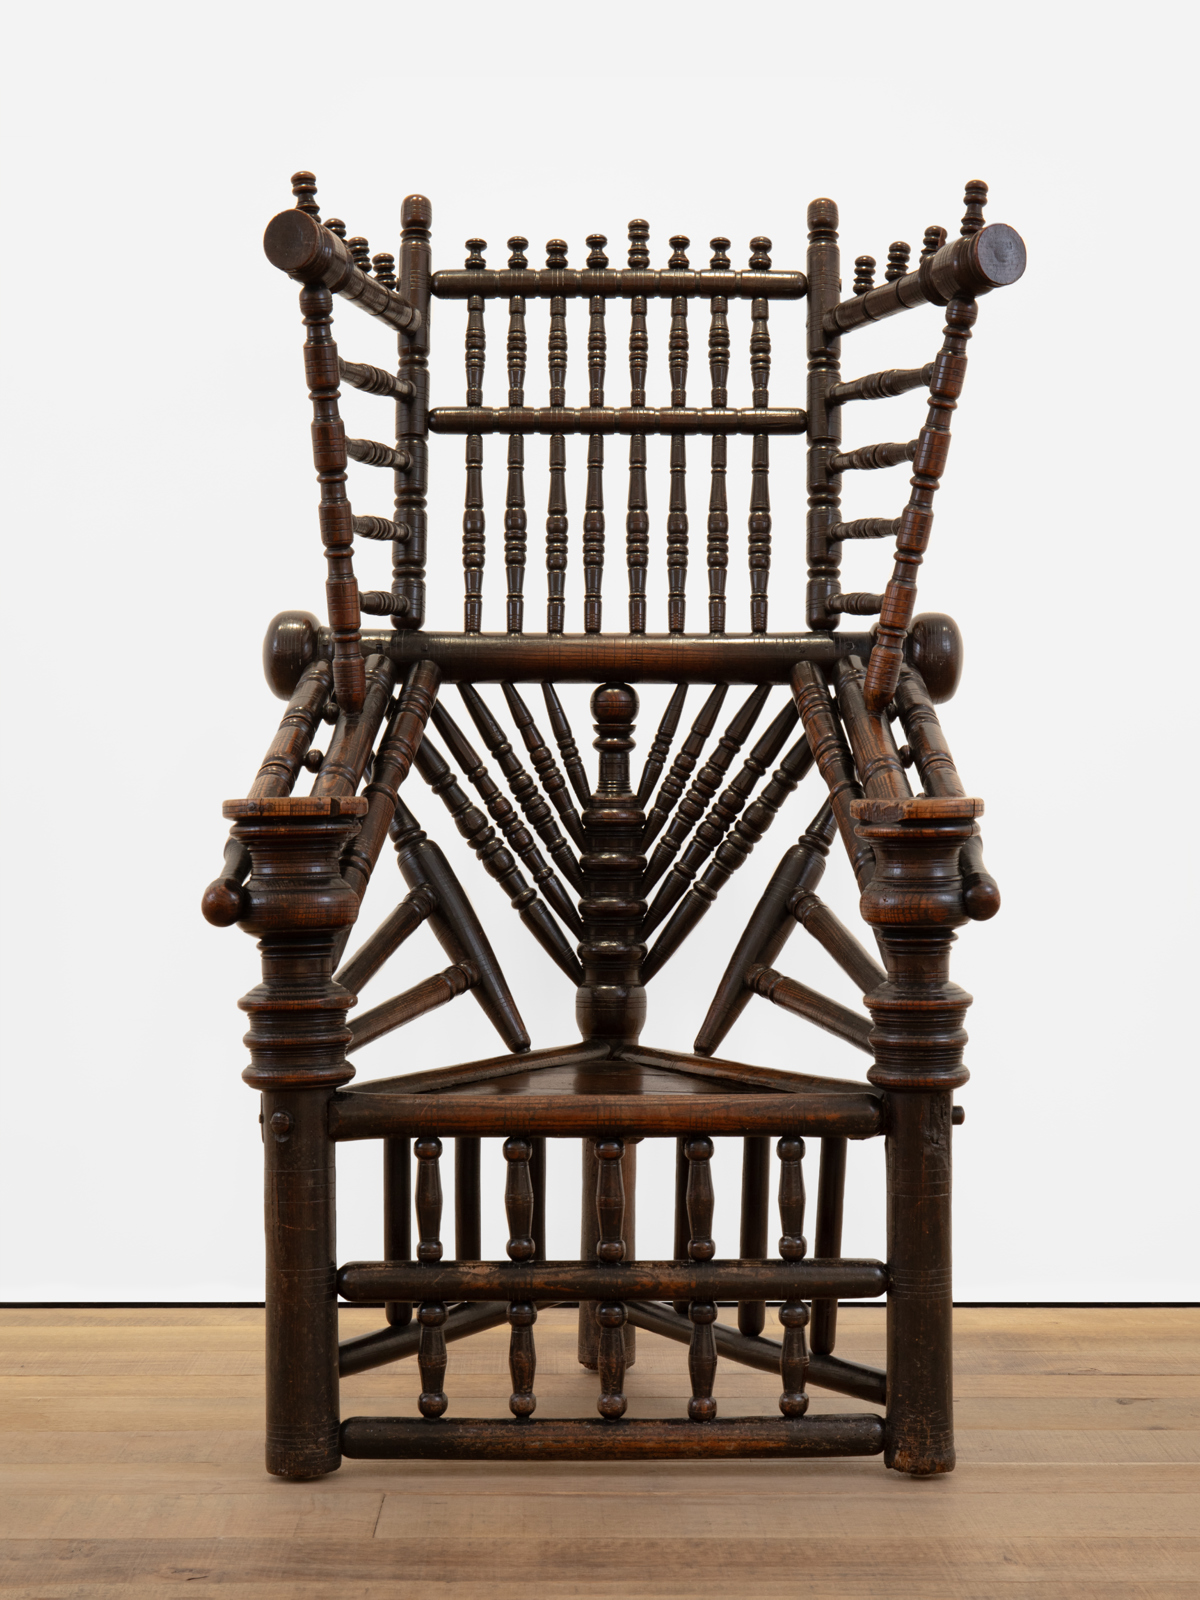 The Wick - English or Welsh
Turner’s Throne, c. 1640
turned ash and fruitwood, oak boards
unique
56 x 32 x 29 inches (142 x 80 x 73.5 cm) Courtesy Simon Andrews and Sadie Coles HQ, London.
Photo: Katie Morrison